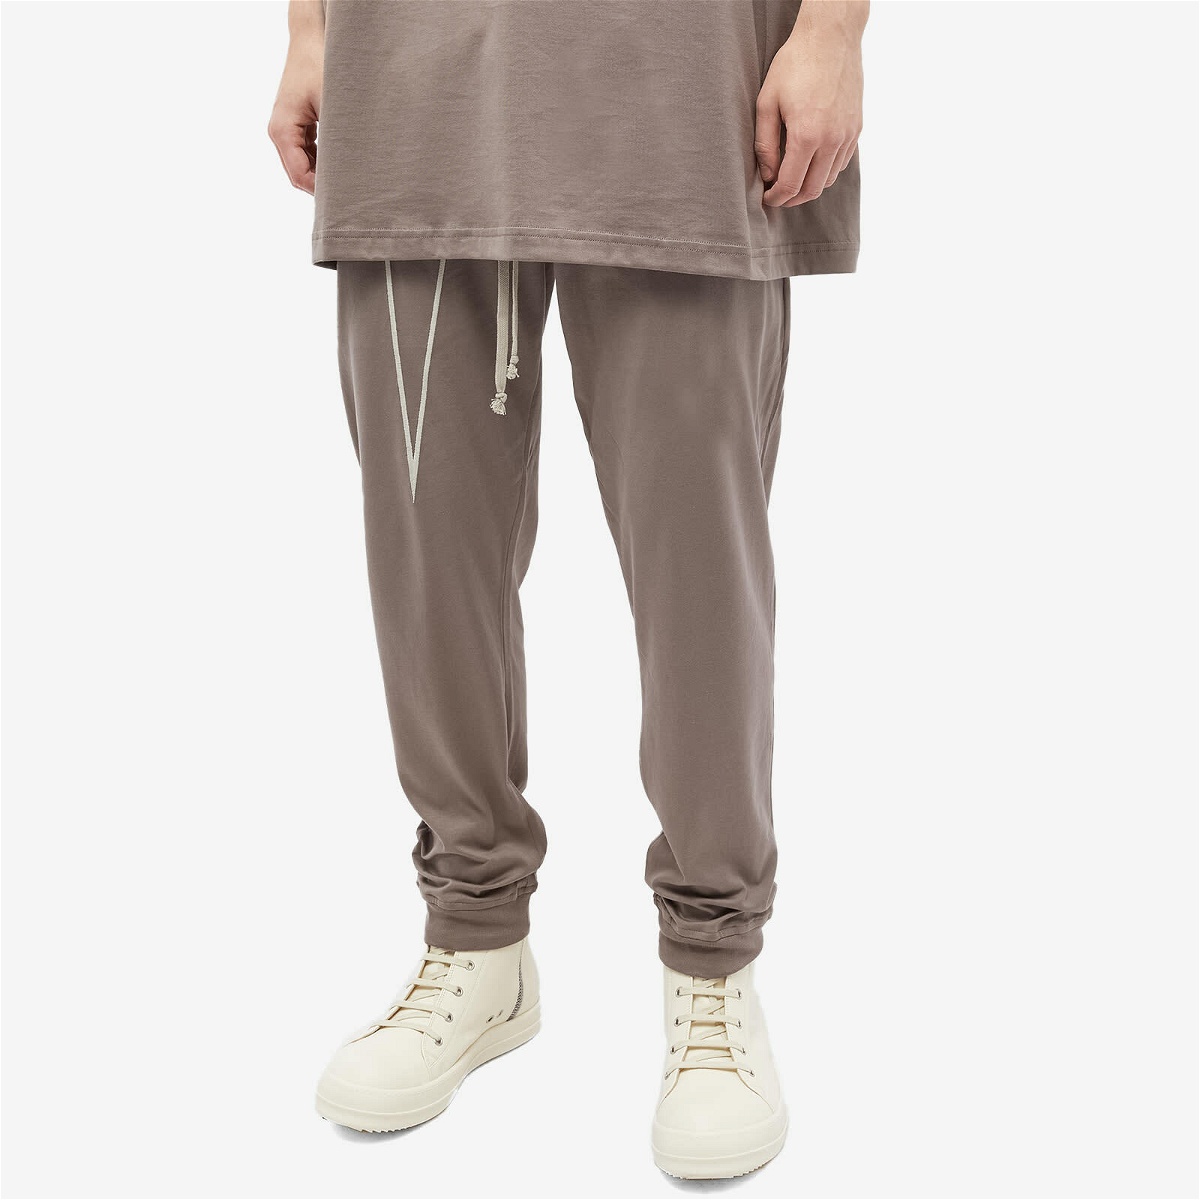 Rick Owens x Champion Jogger in Dust Rick Owens